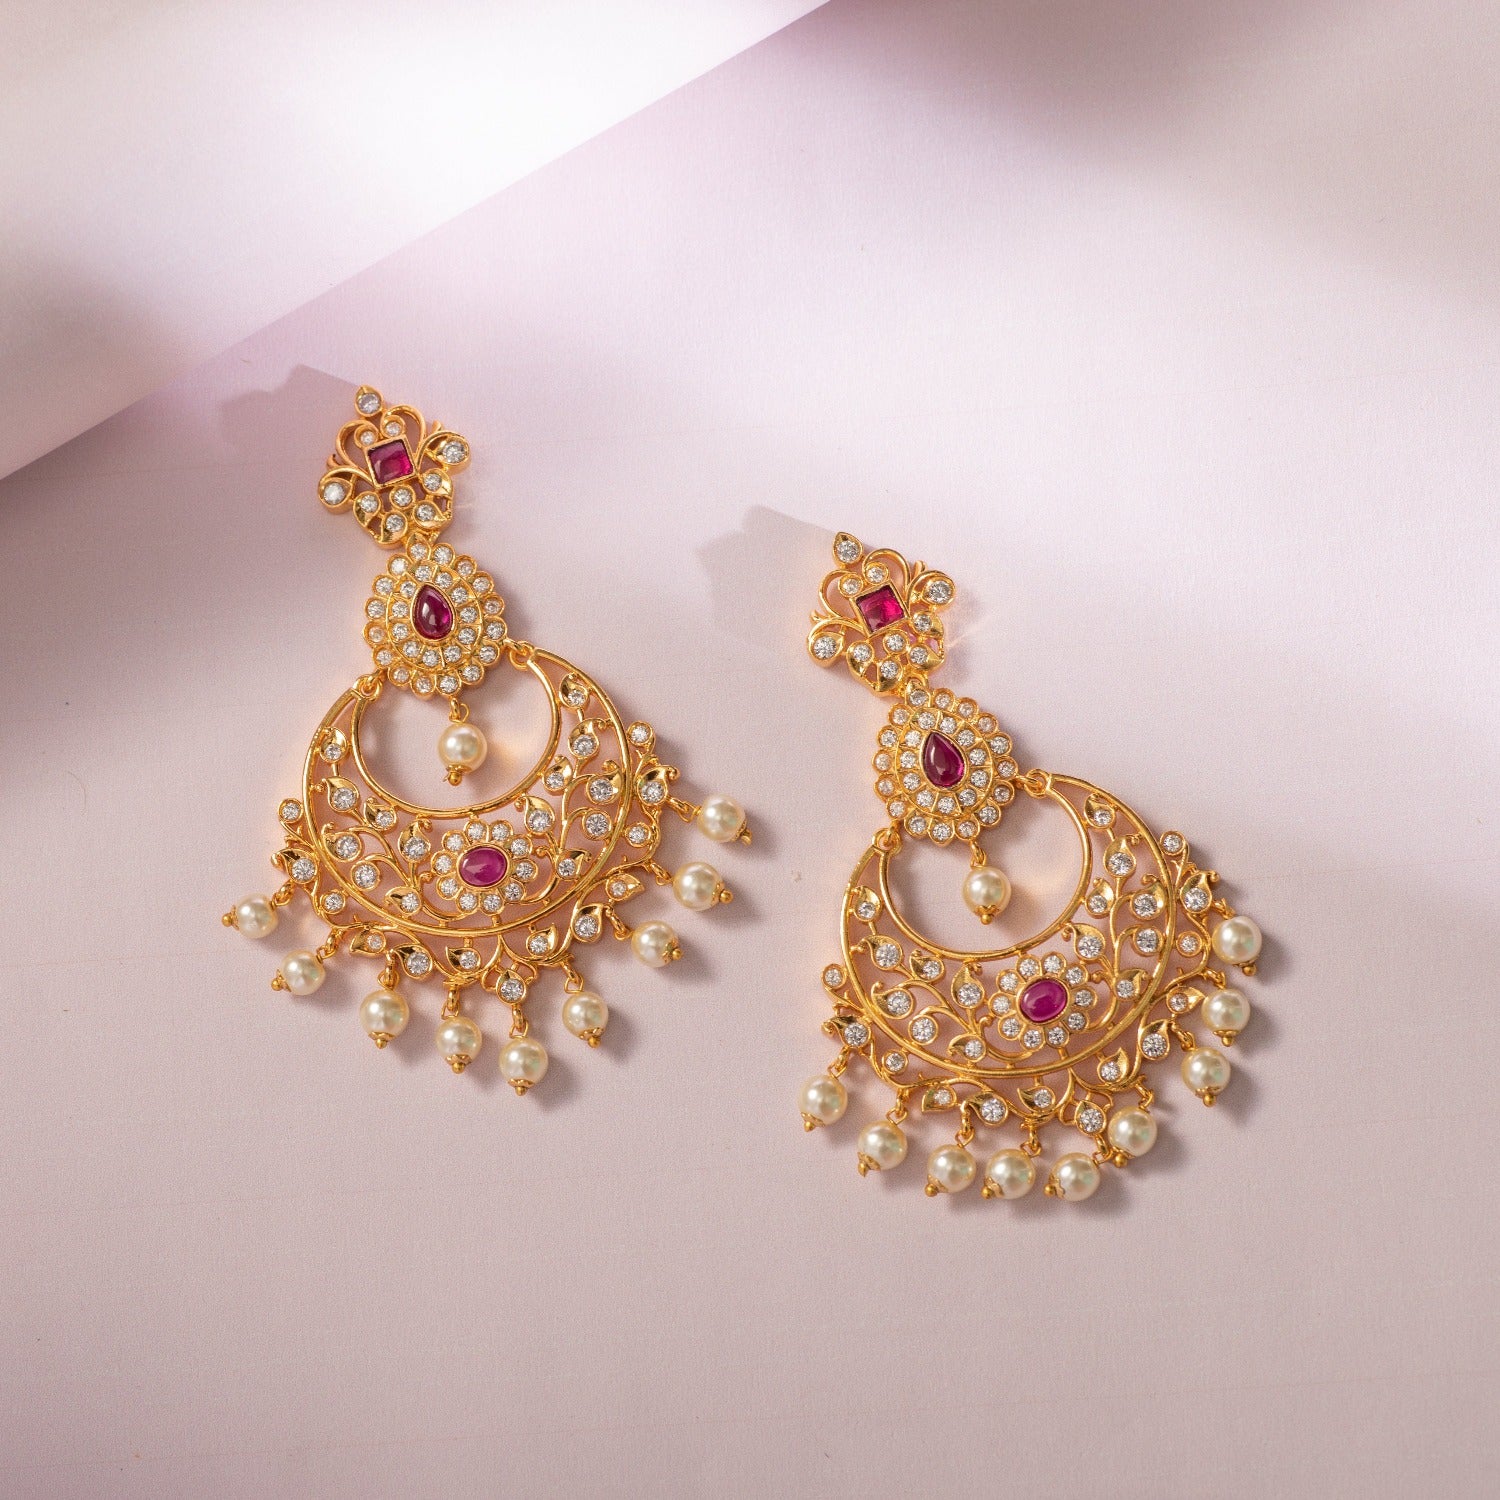 atjewels Peacock Stud Earrings in Multi Shape CZ and Pink Sapphire wit –  atjewels.in